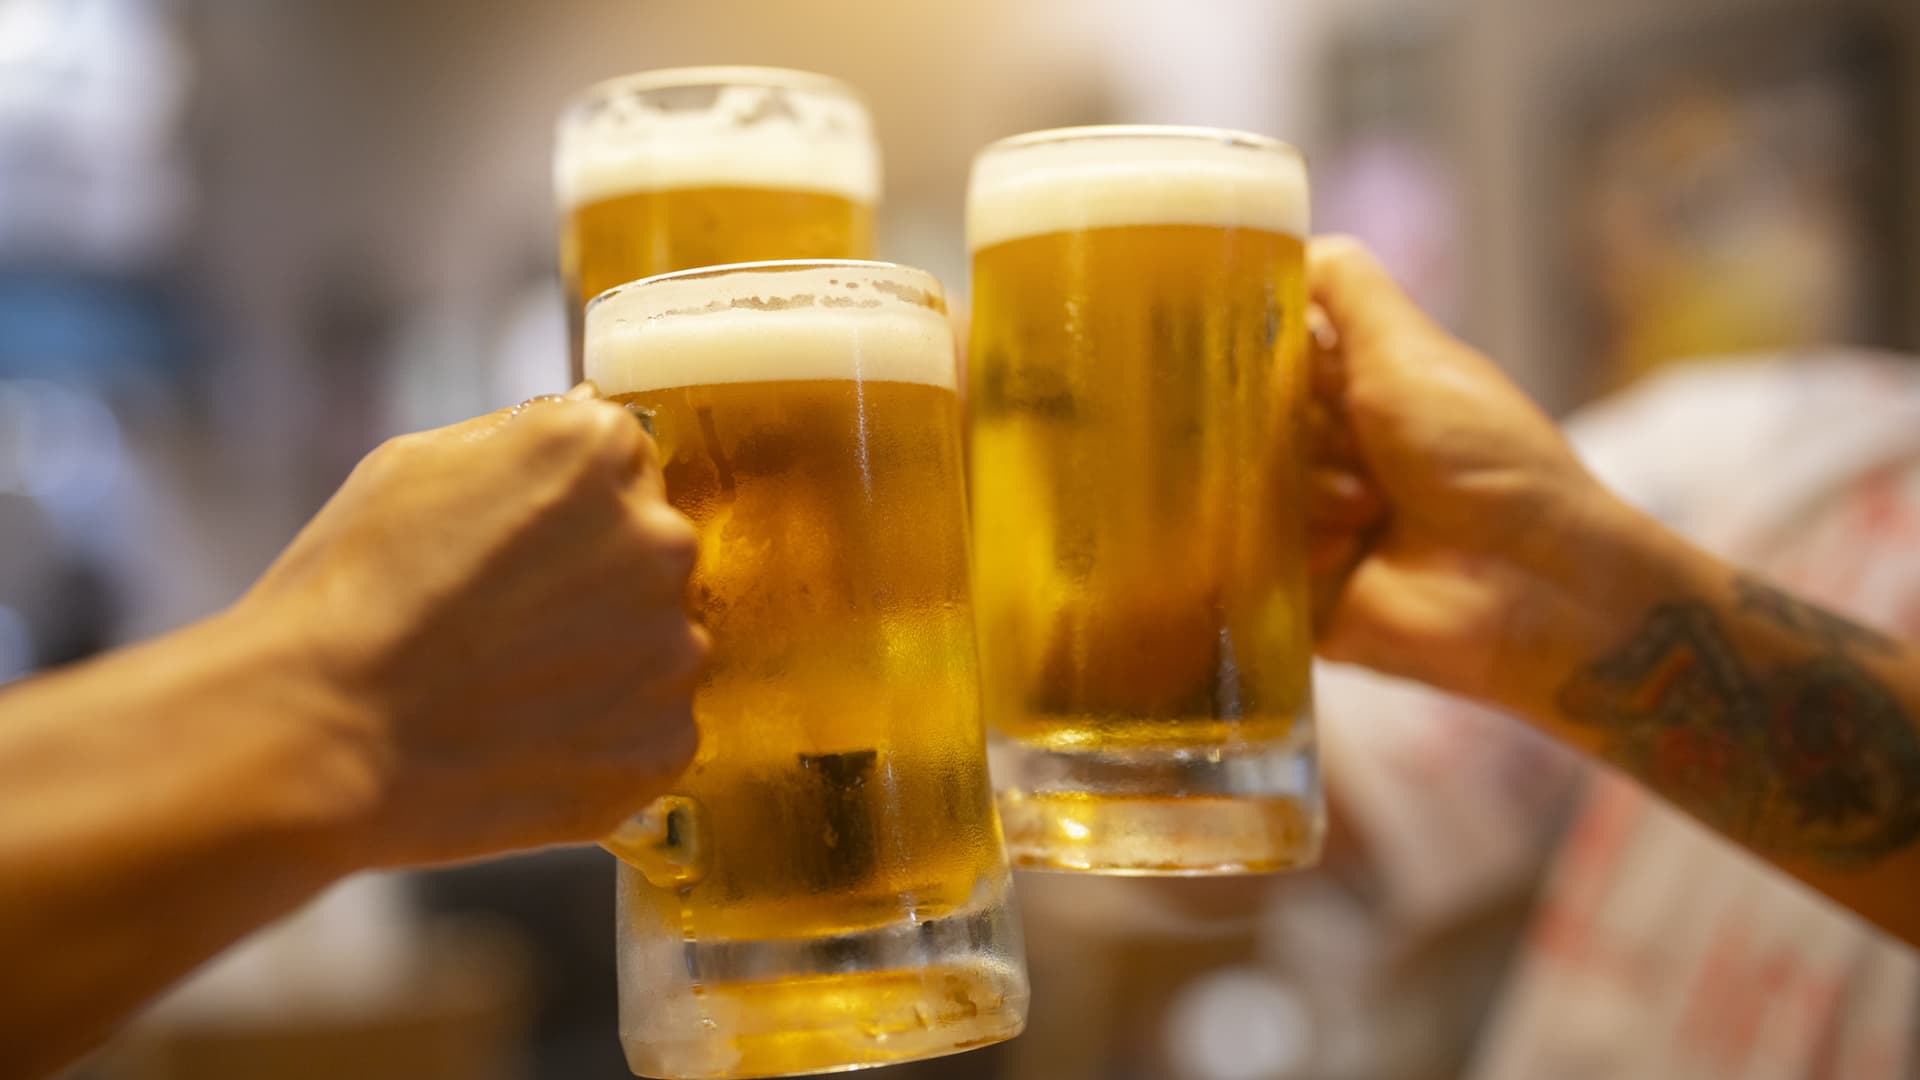 Beer is on the way to losing its leading share of the US alcohol market